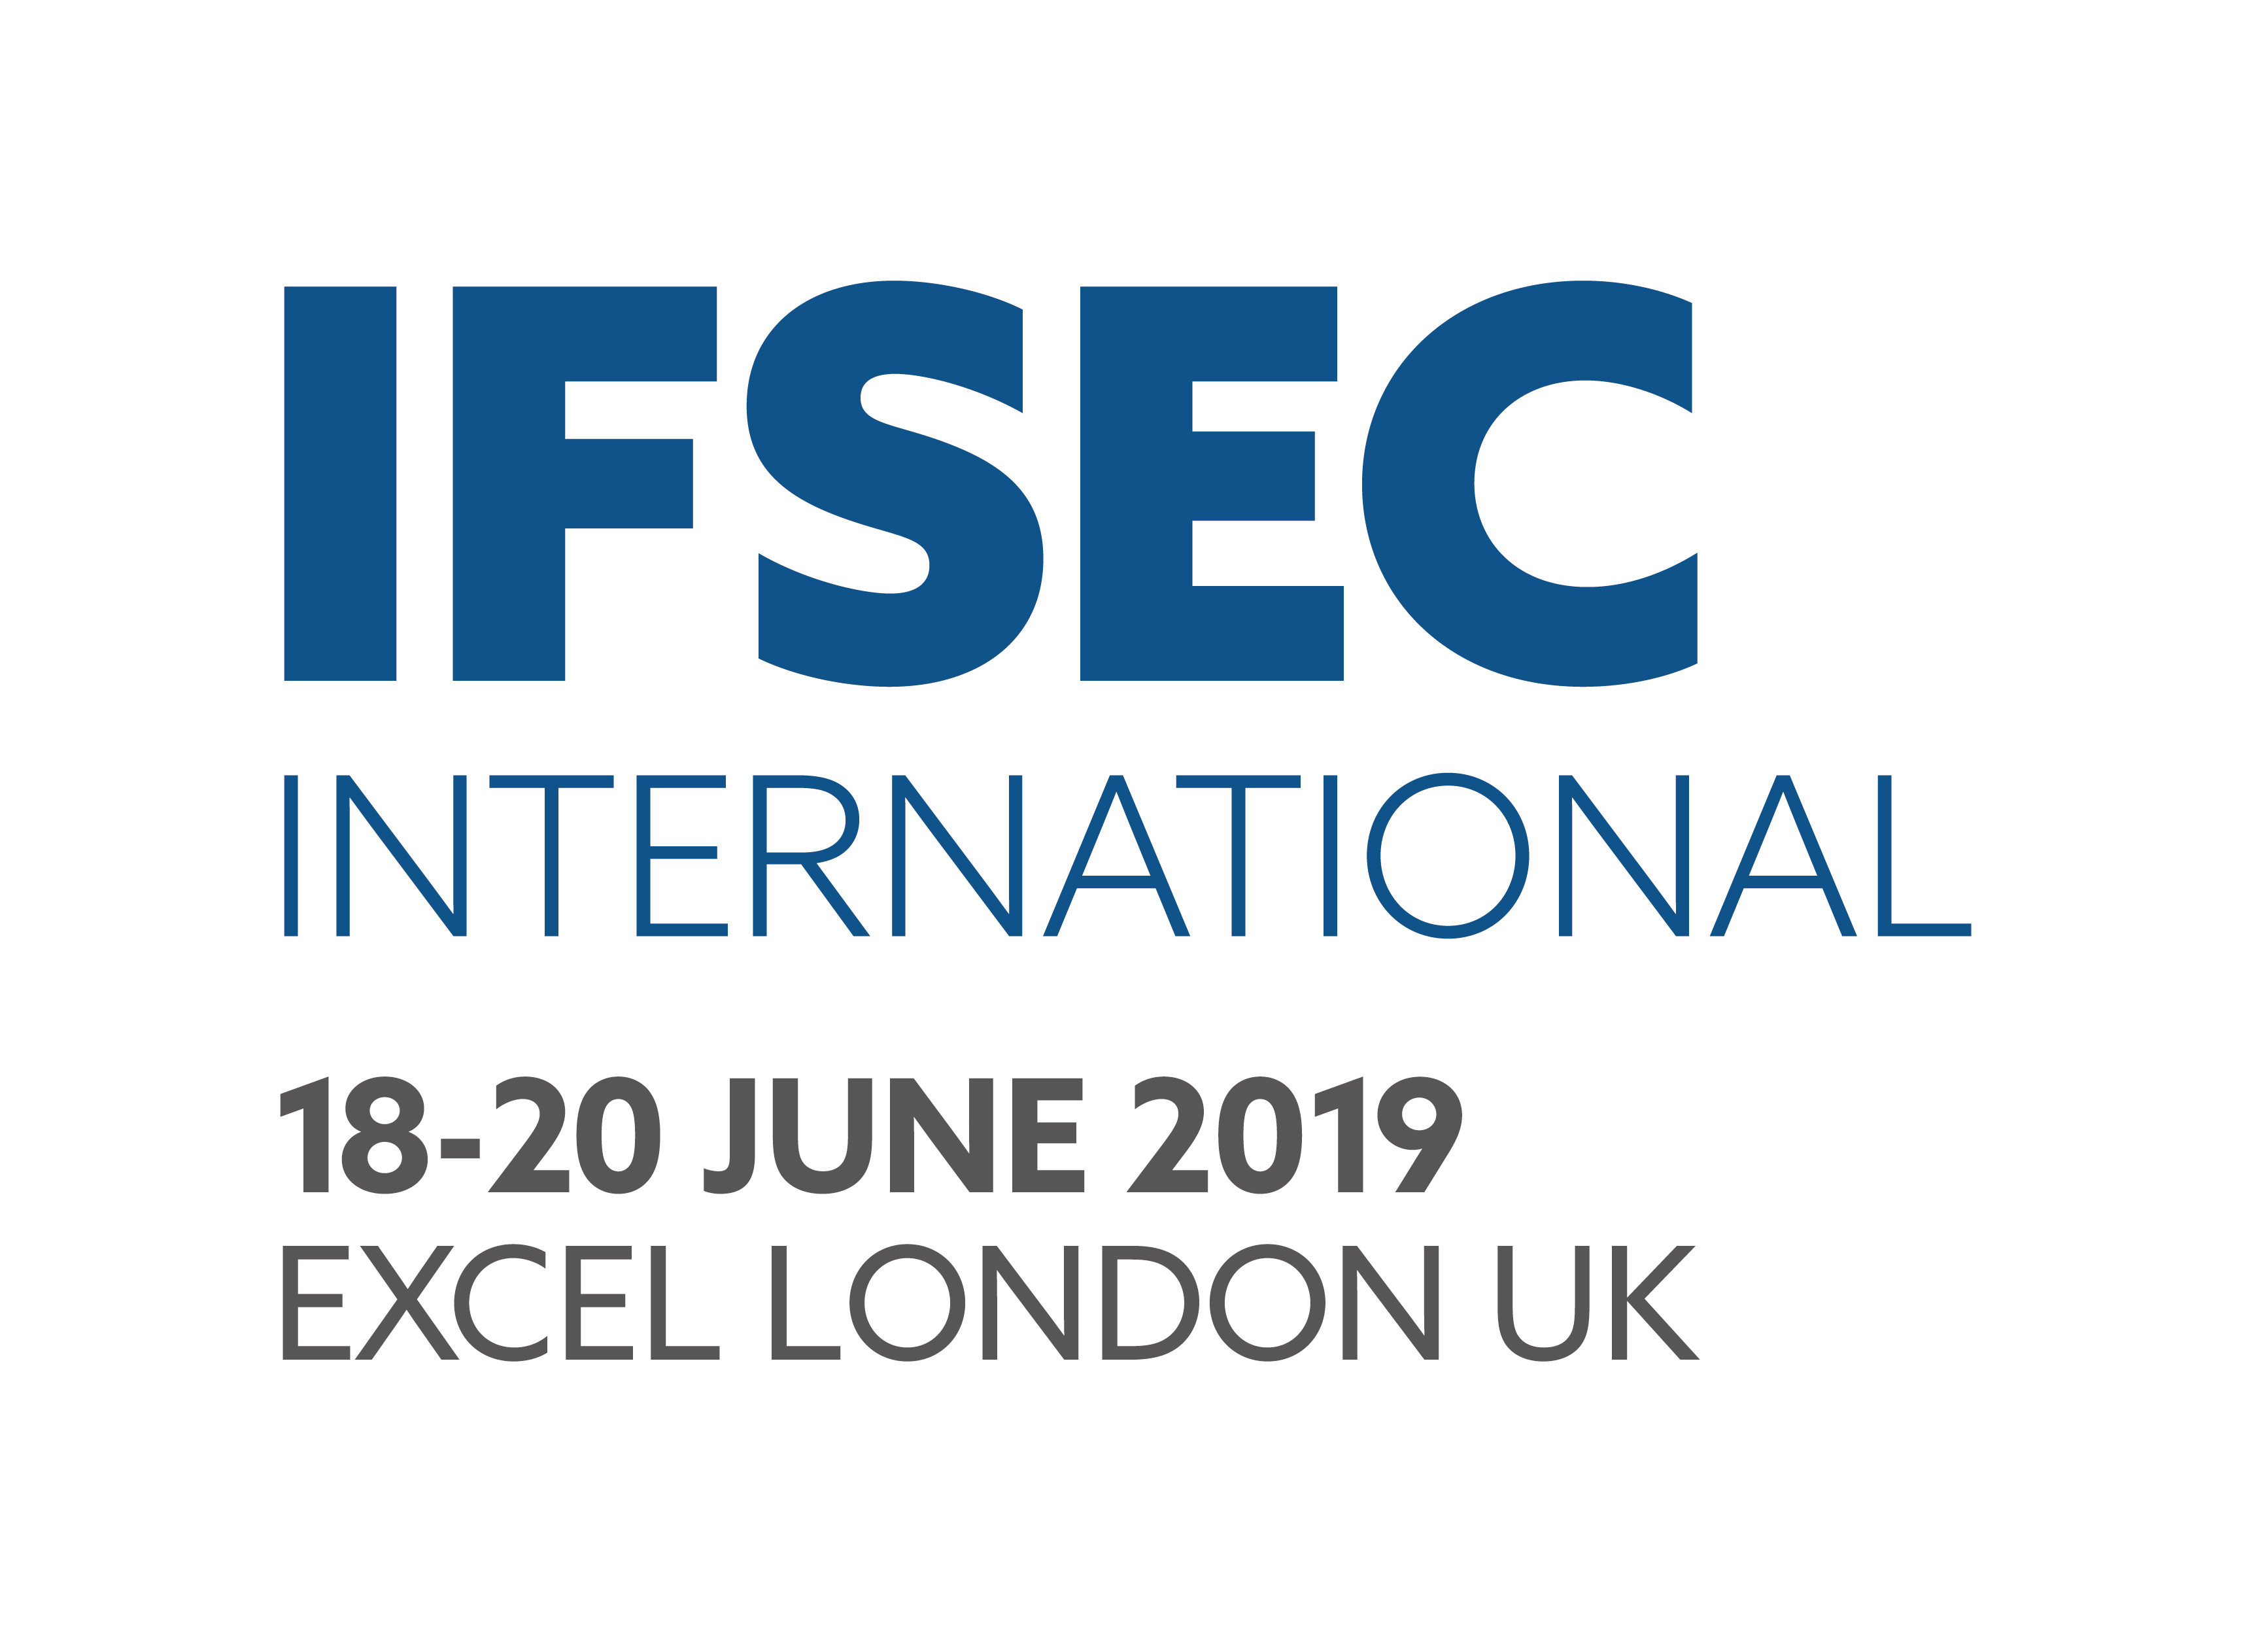 IFSEC International 2019 welcomes back the Converged Security Centre powered by Vidsys